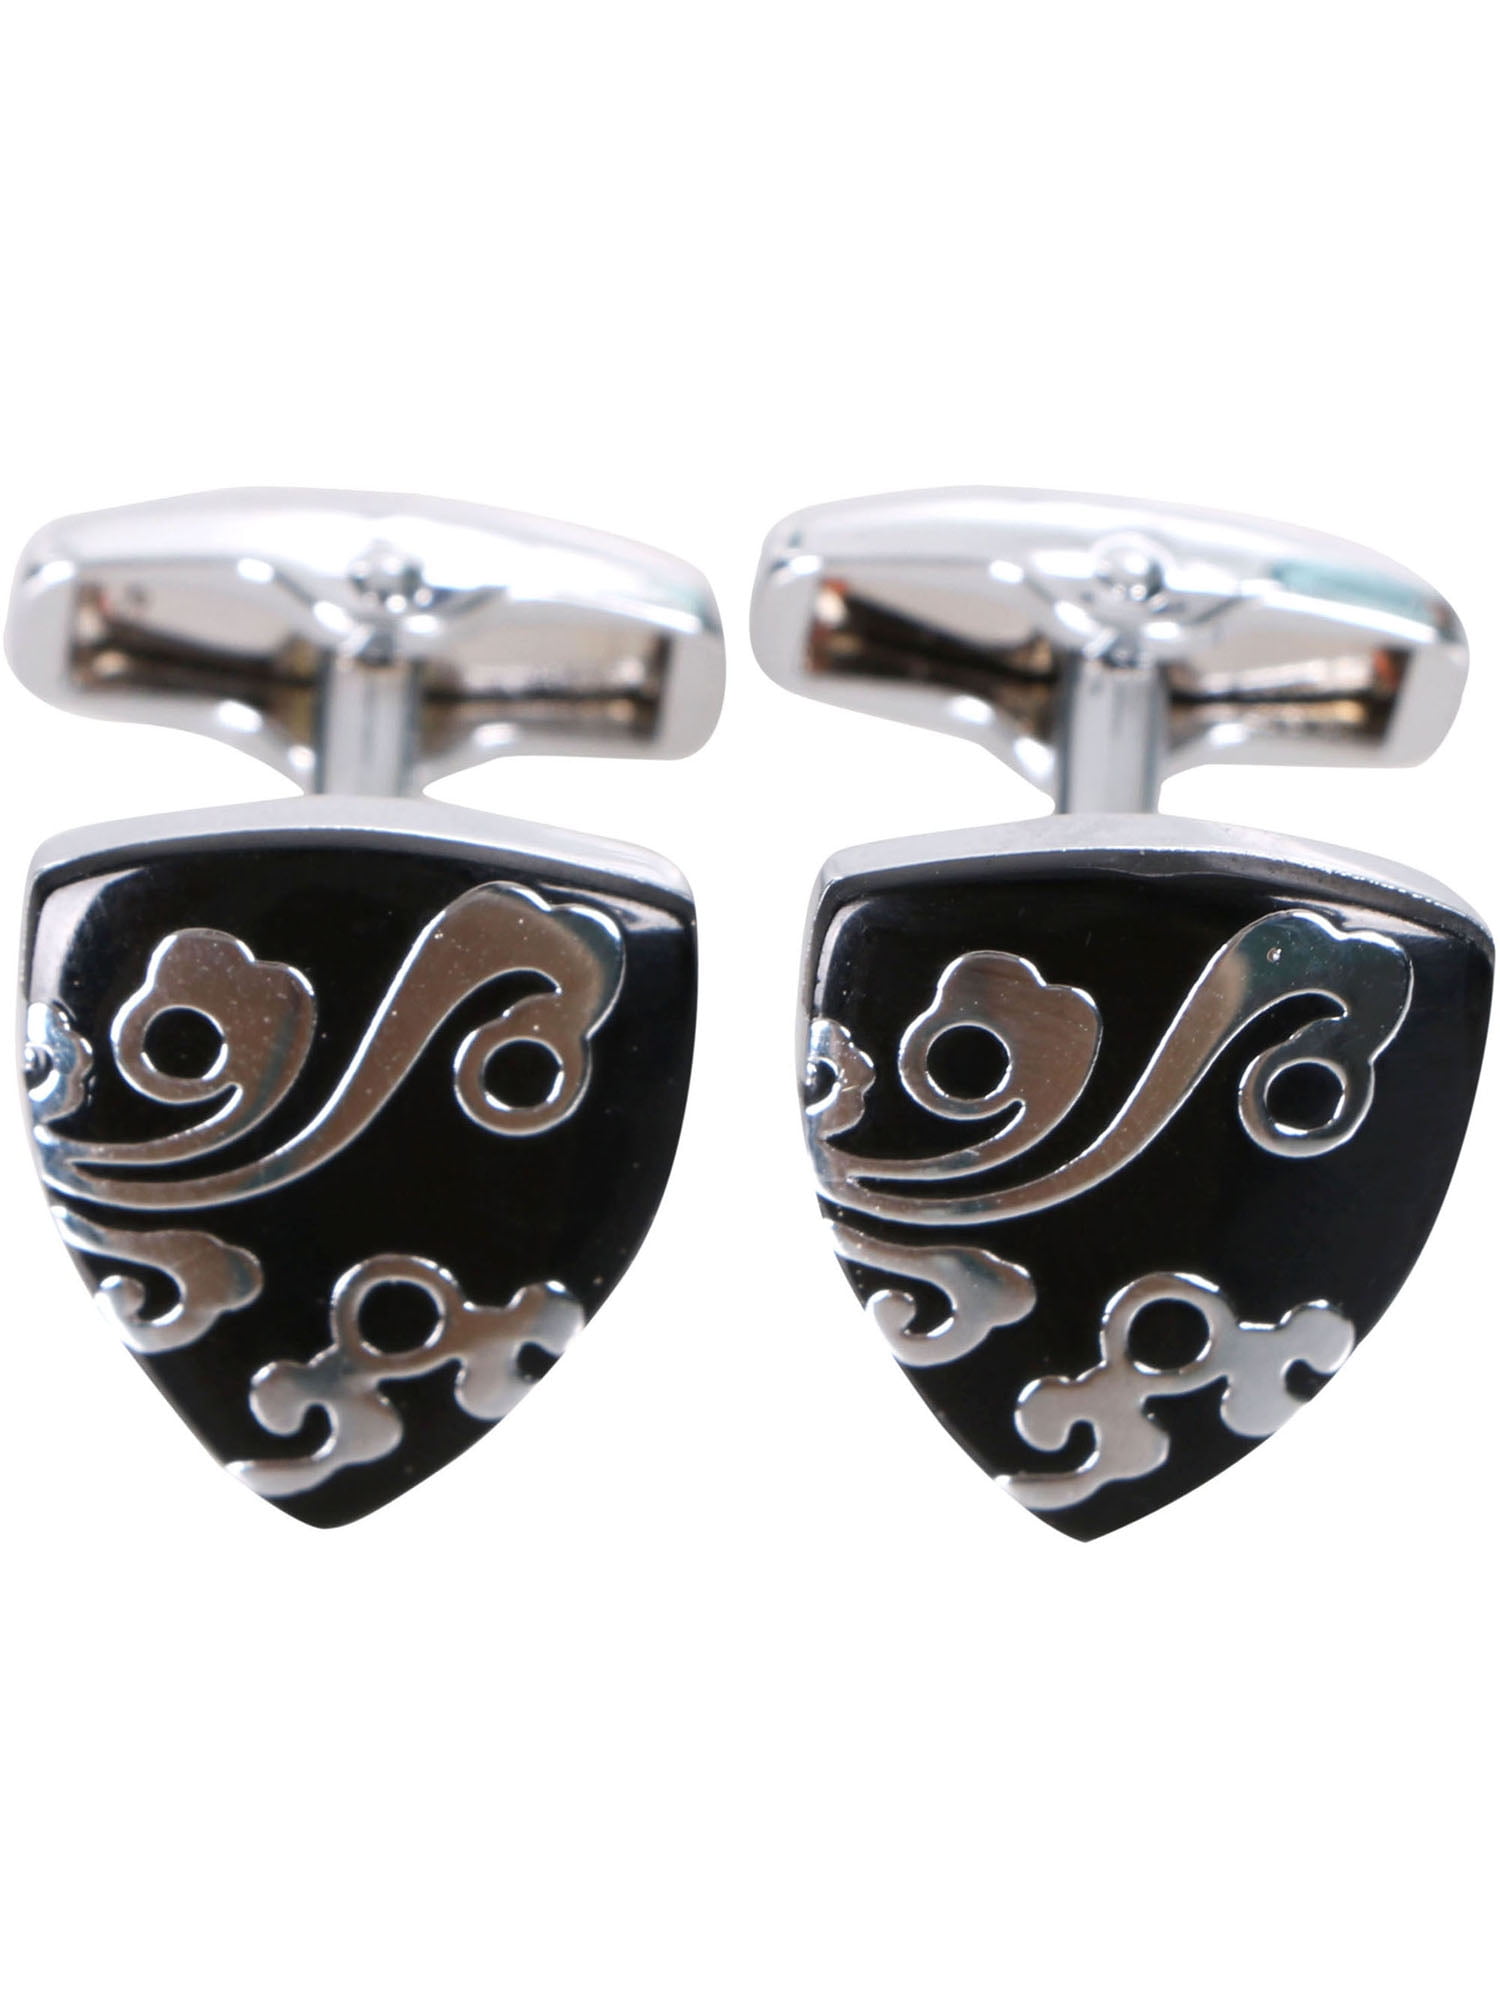 Details about   Zinc Alloy Vintage Men's Wedding Gift Classical Cuff Links Jewelry Cufflinks